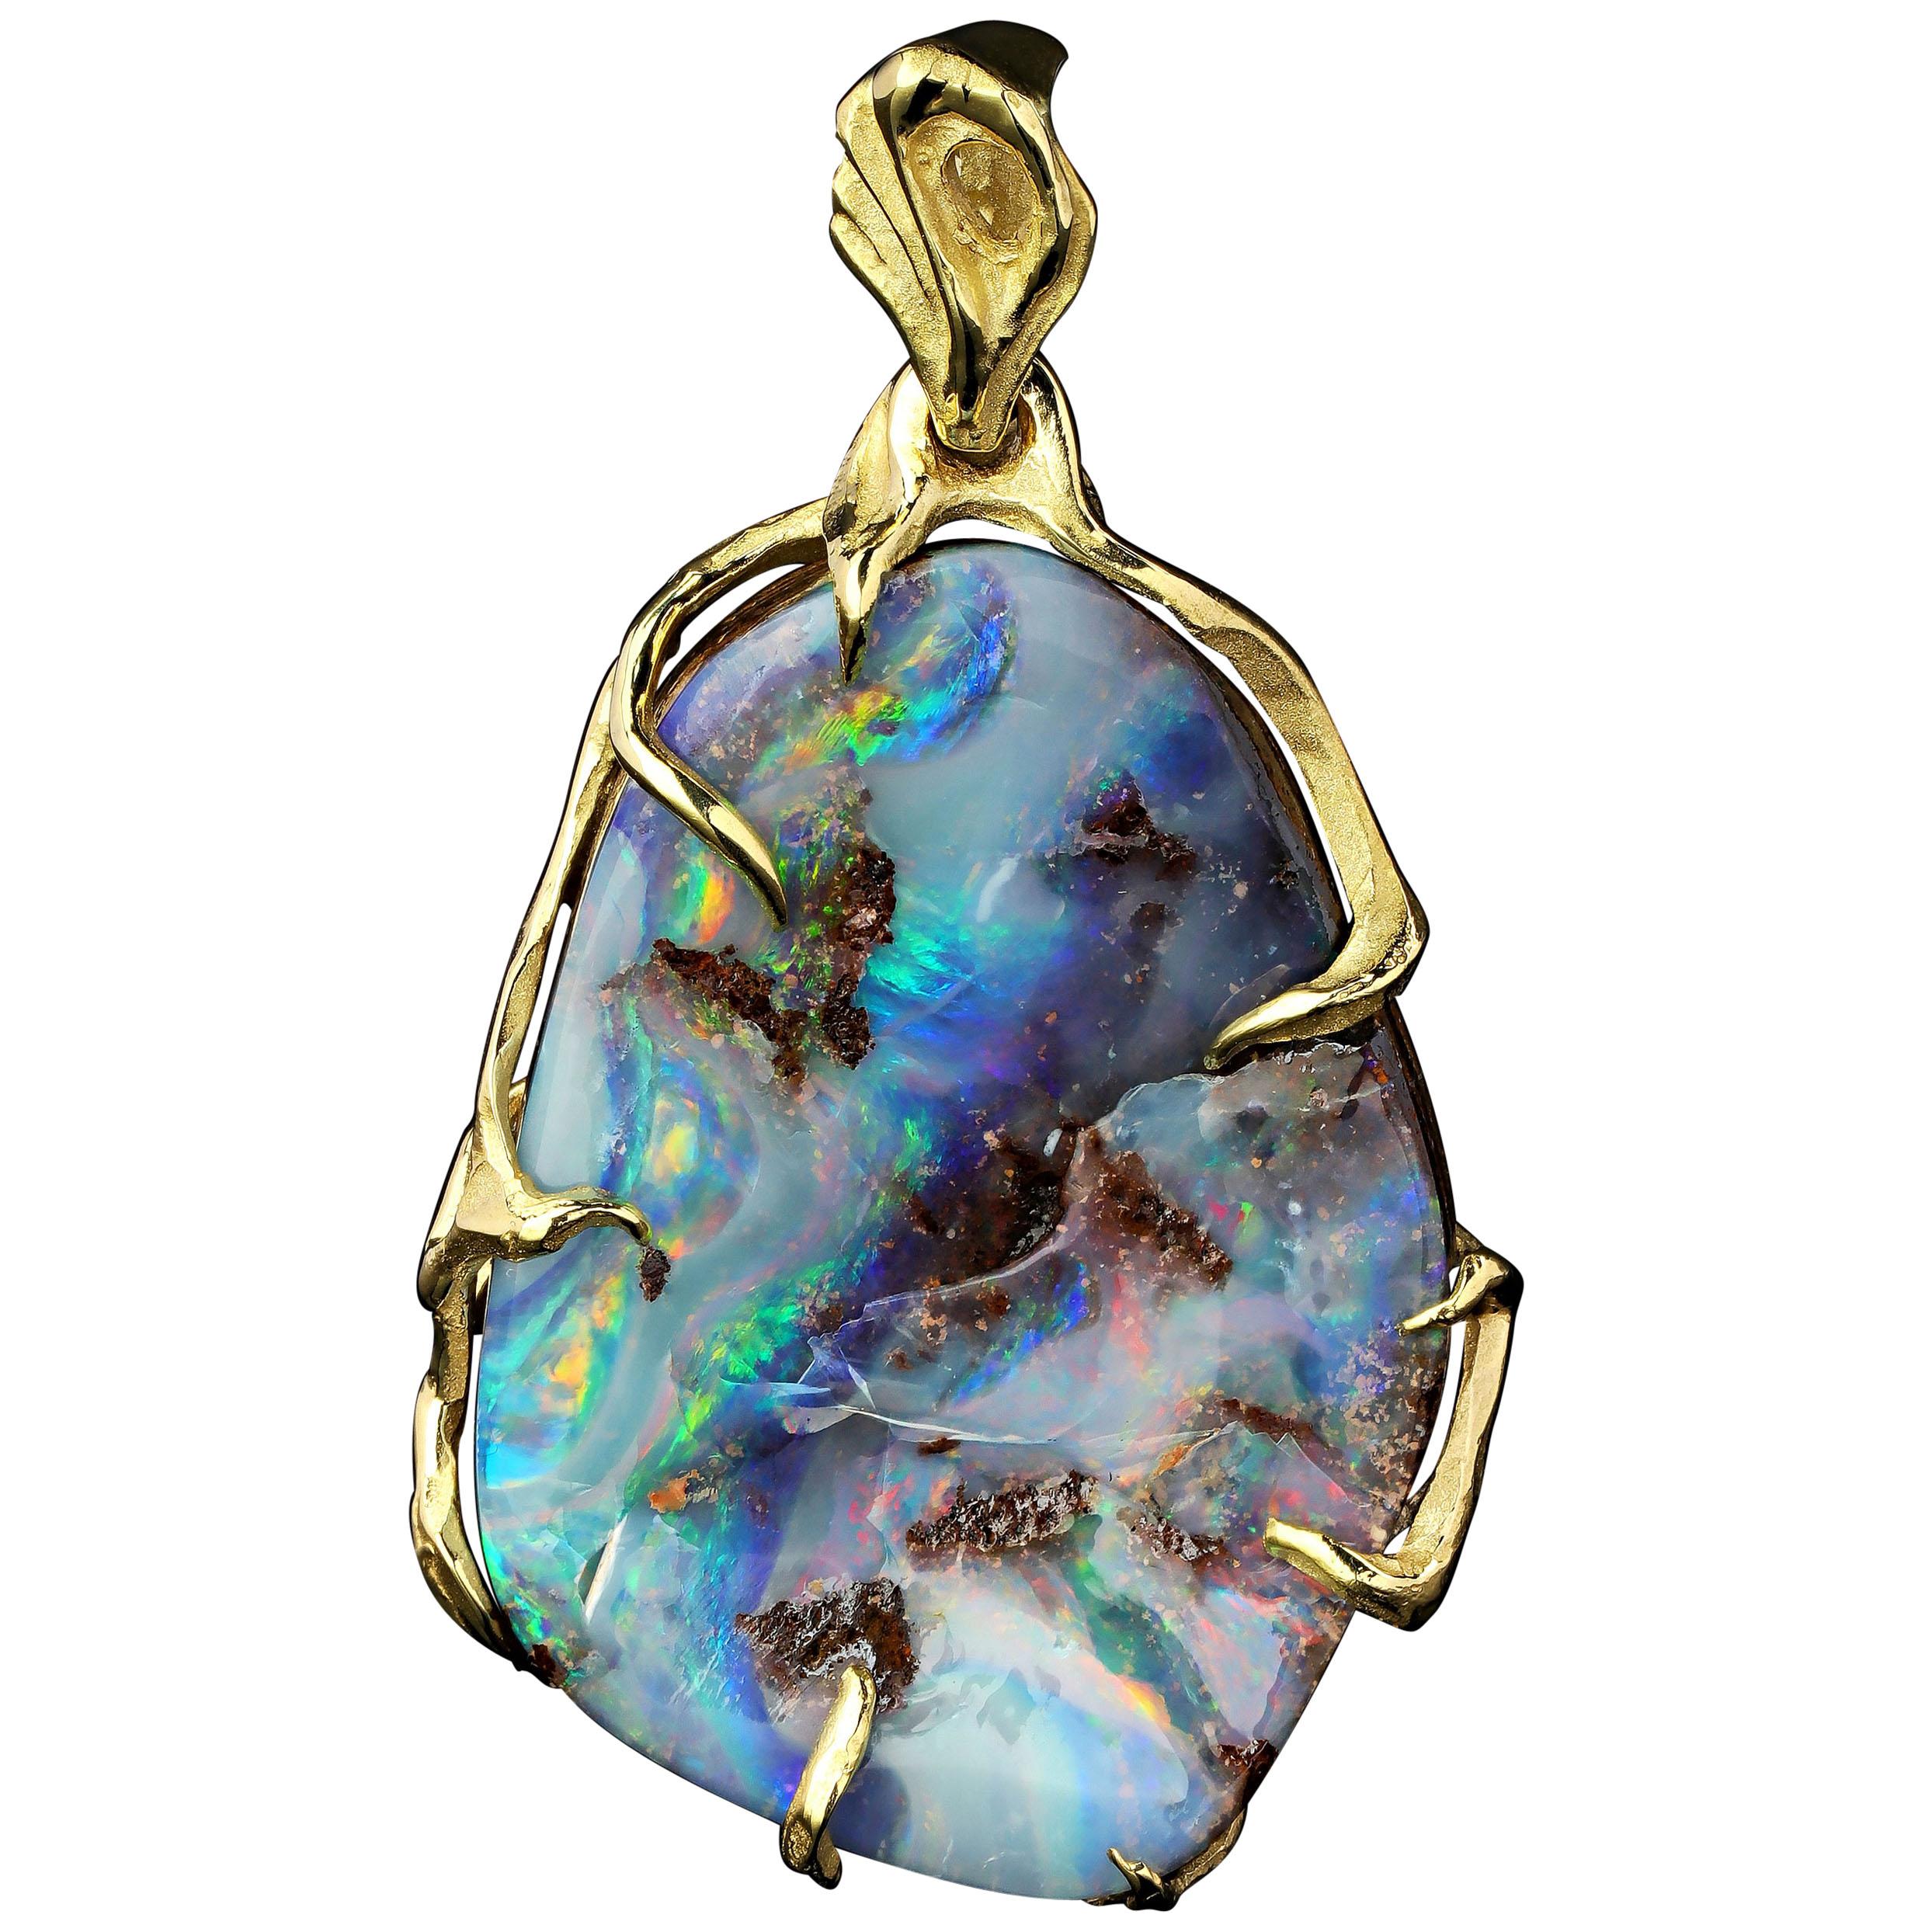 14k Yellow or White Gold 5 Millimeter Green Simulated Opal Pendant Necklace